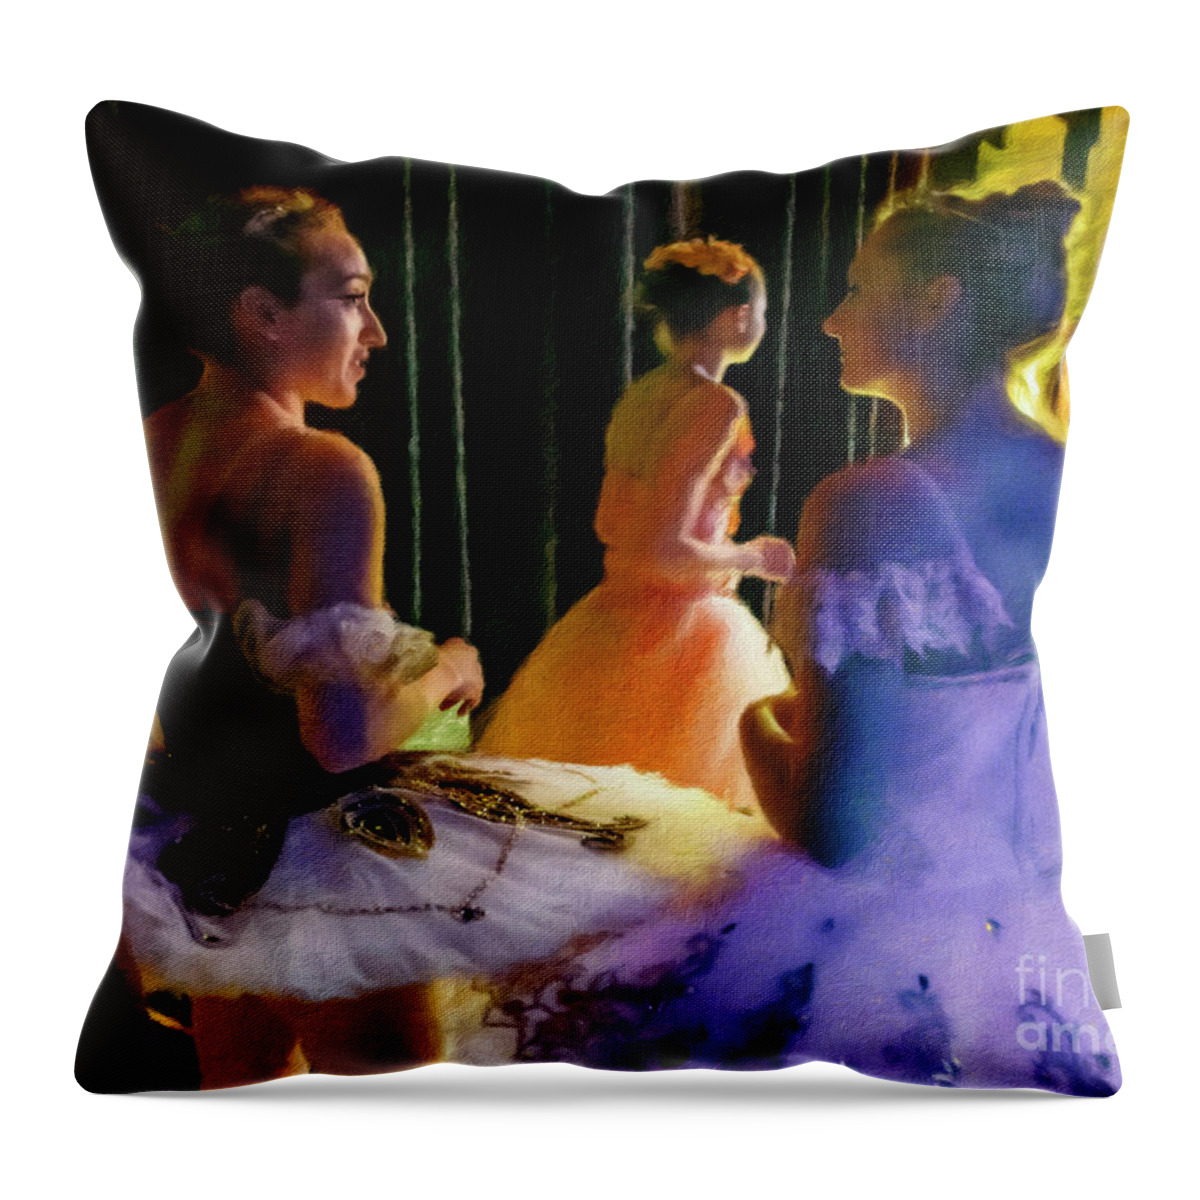 Ballerina Throw Pillow featuring the photograph Ballerina Discussions #1 by Craig J Satterlee